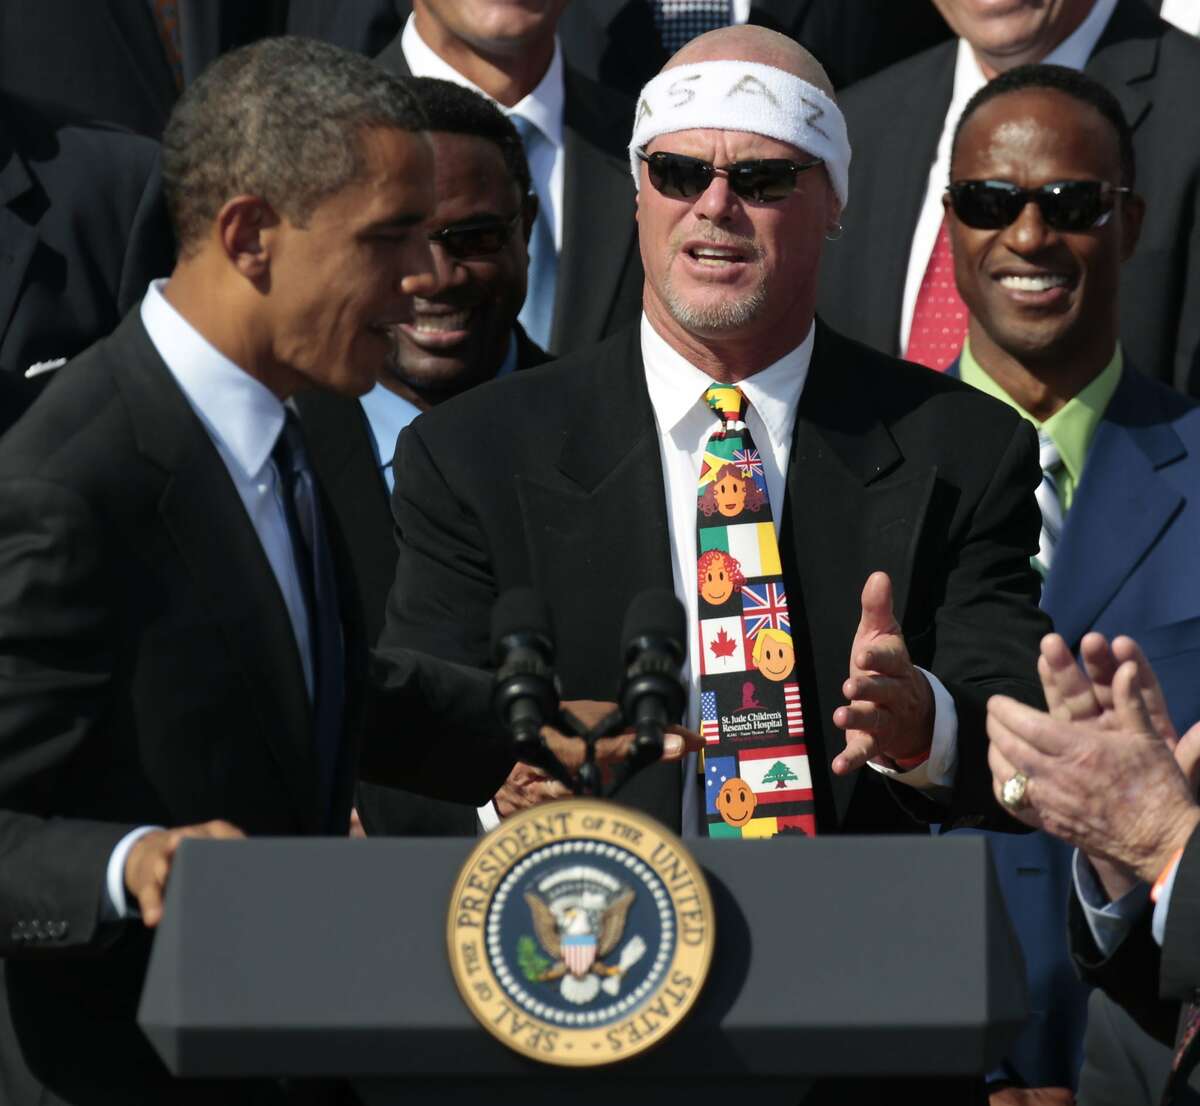 FILE - In this Oct. 7, 2011 file photo, President Barack Obama, left, looks towards quarterback Jim McMahon, wearing headband, as he honors the 1985 Super Bowl XX Champion Chicago Bears football team during a ceremony on the South Lawn of the White House in Washington. A group of retired NFL players says in a lawsuit that the league illegally supplied them with risky painkillers that numbed their injuries and led to medical complications. Attorney Steven Silverman says his firm filed the lawsuit Tuesday, May 20, 2014, in federal court in San Francisco. The eight named plaintiffs include Hall of Fame defensive end Richard Dent and quarterback Jim McMahon. (AP Photo/Pablo Martinez Monsivais, File)